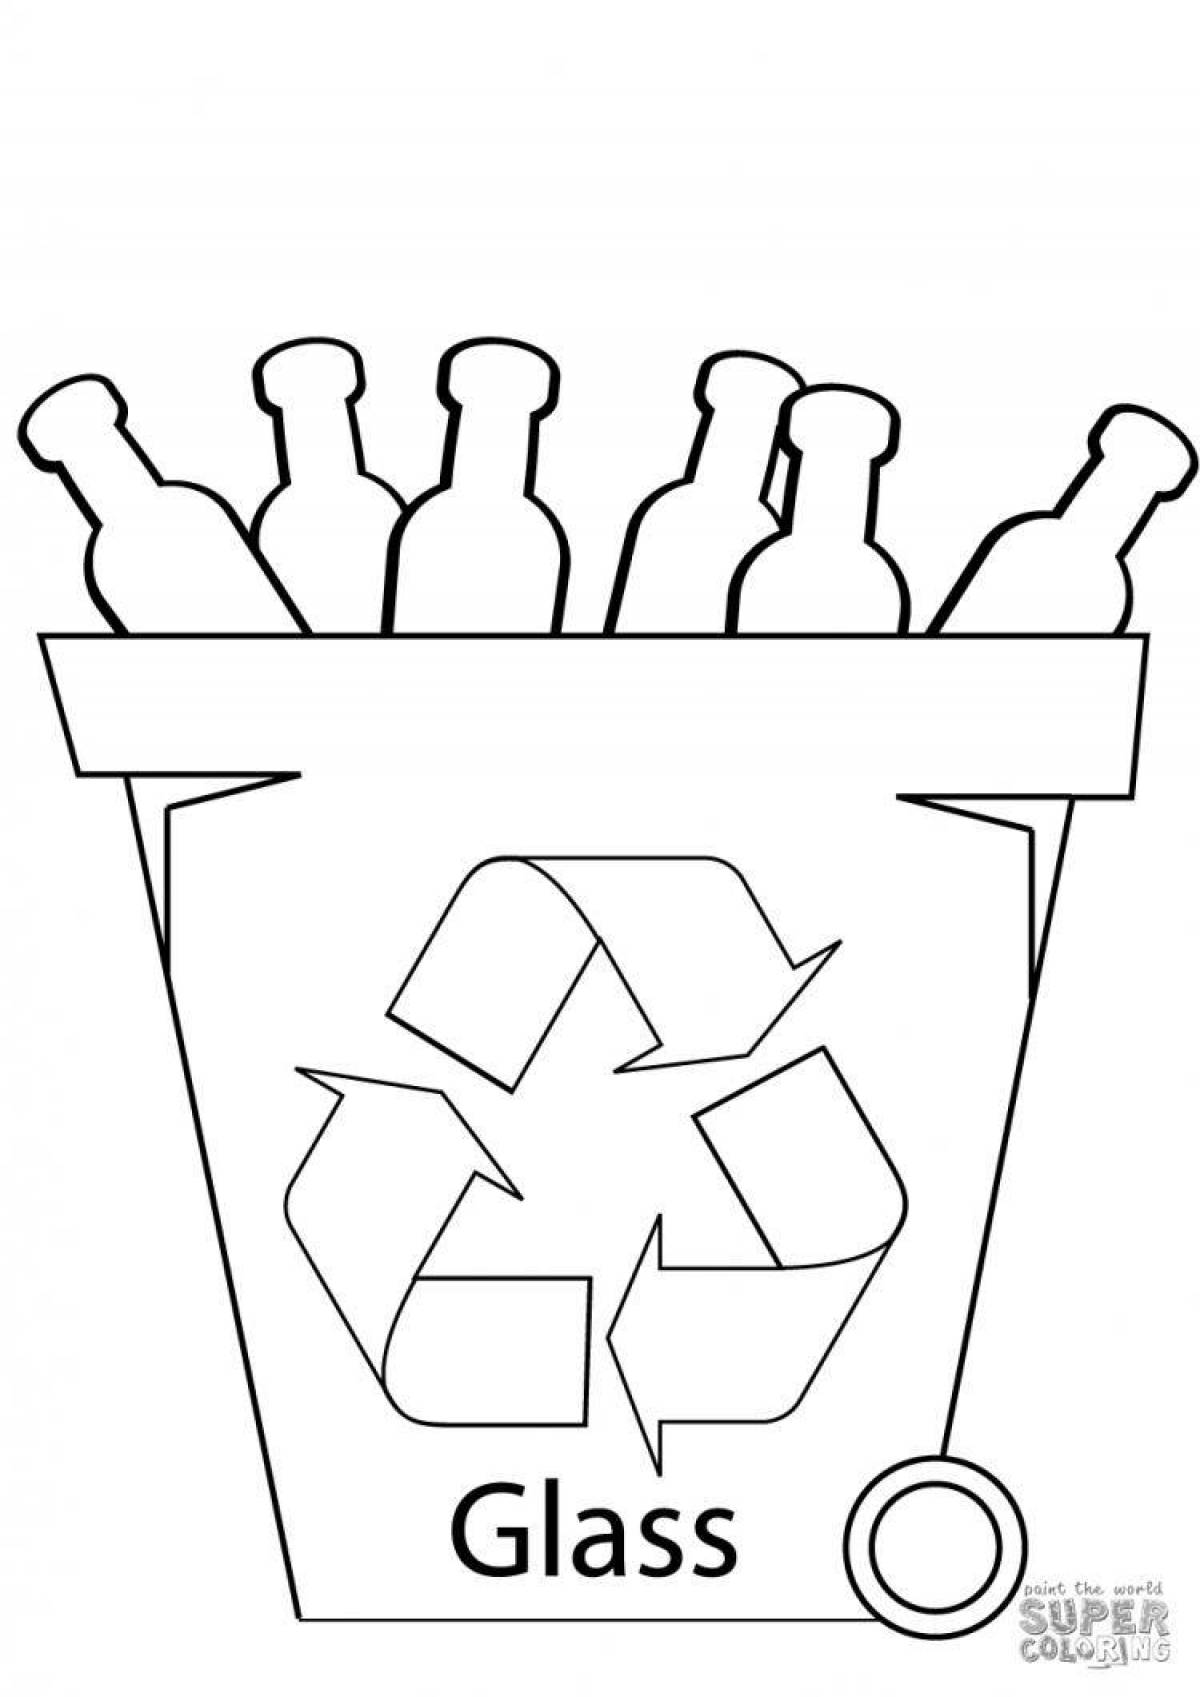 Bright separate waste collection page